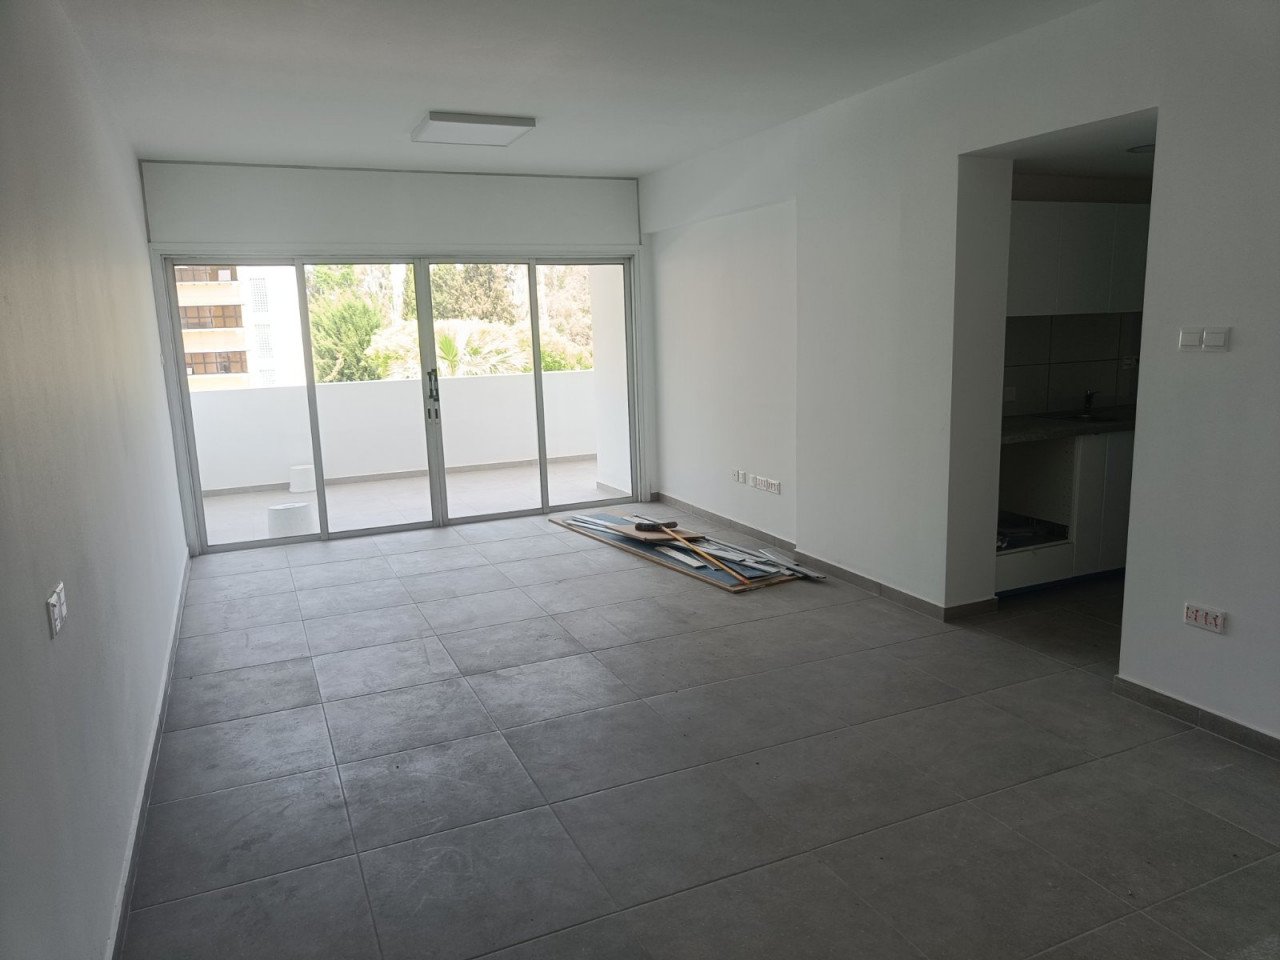 For Sale: Commercial (Office) in Strovolos, Nicosia for Rent | Key Realtor Cyprus